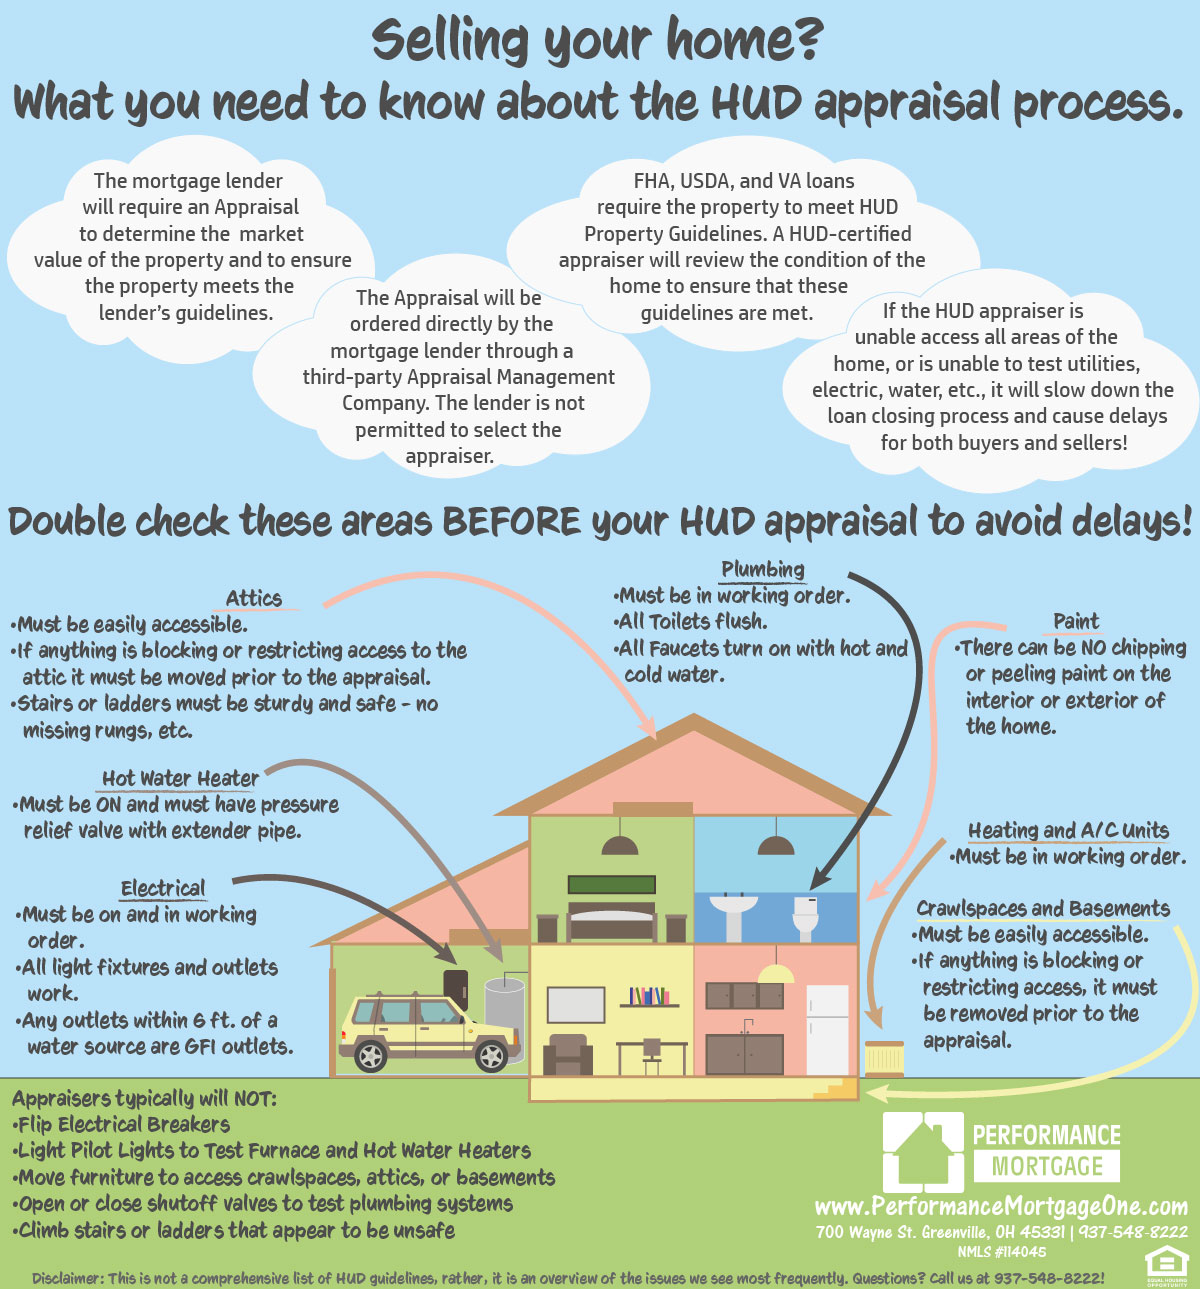 HUD Appraisal: What Sellers Need to Know